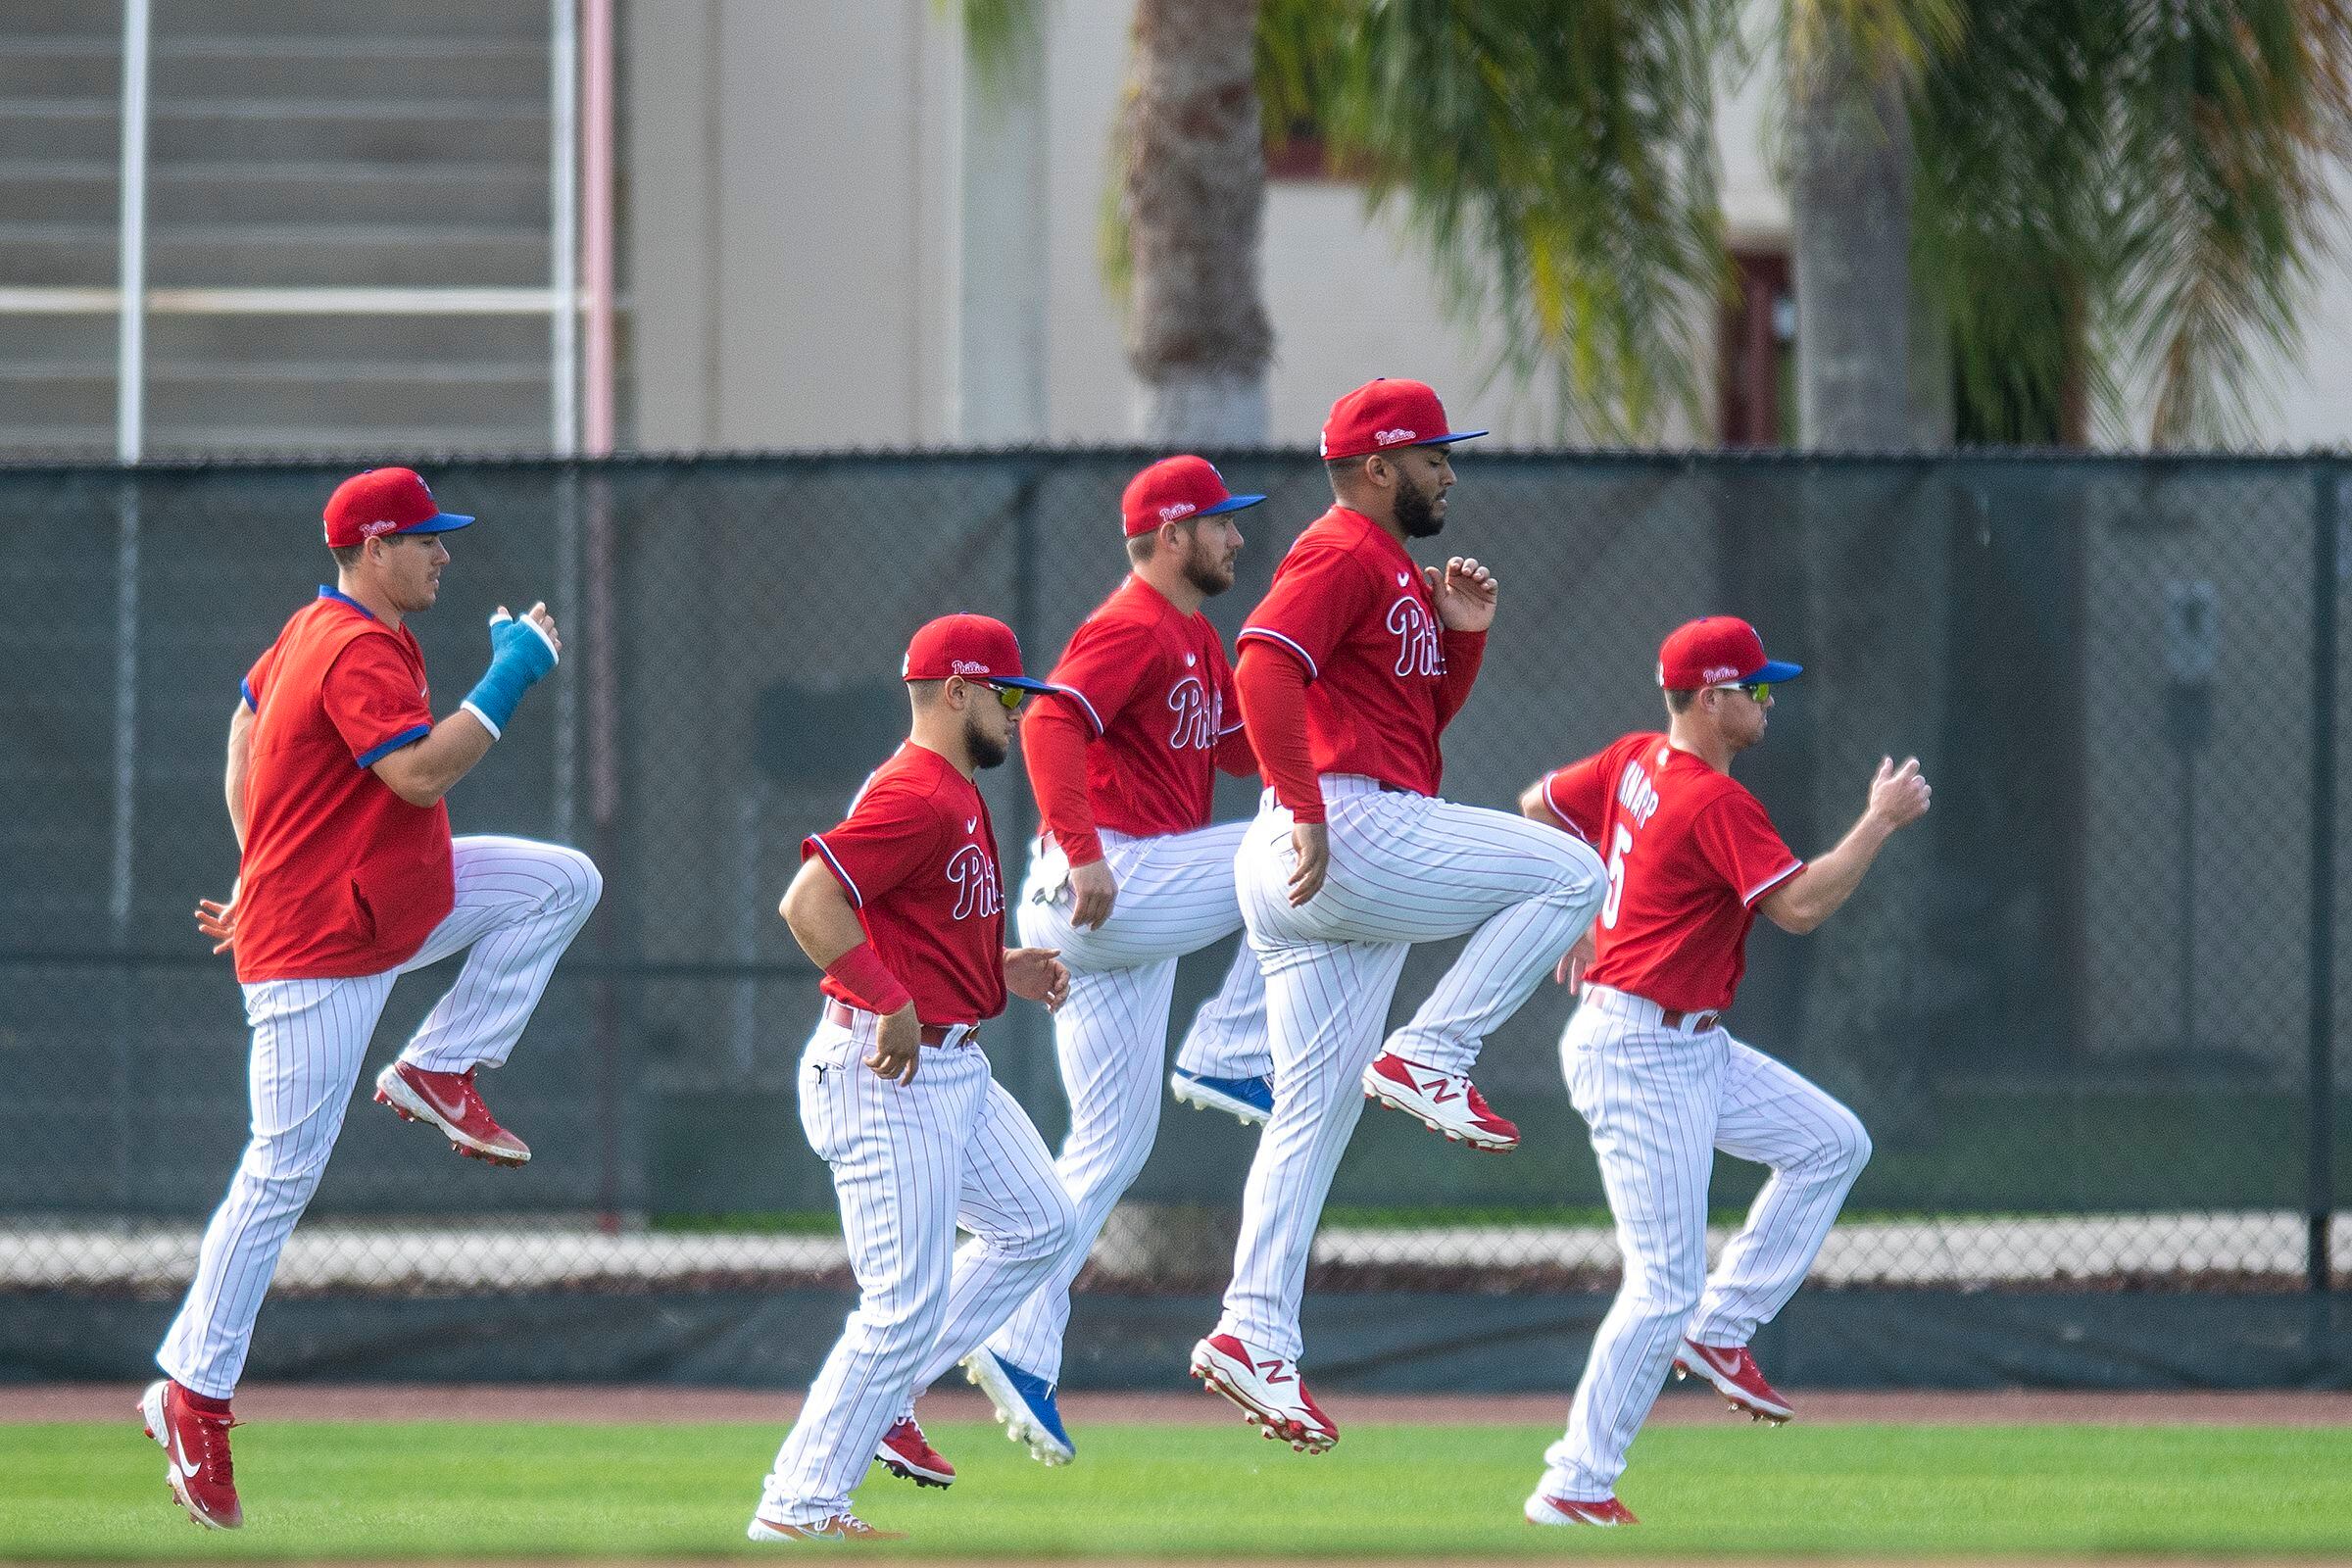 Philadelphia Phillies shortstop Scott Kingery (4) throws to first base  during a spring training baseball game against the Philadelphia Phillies on  March 26, 2023 at Ed Smith Stadium in Sarasota, Florida. (Mike